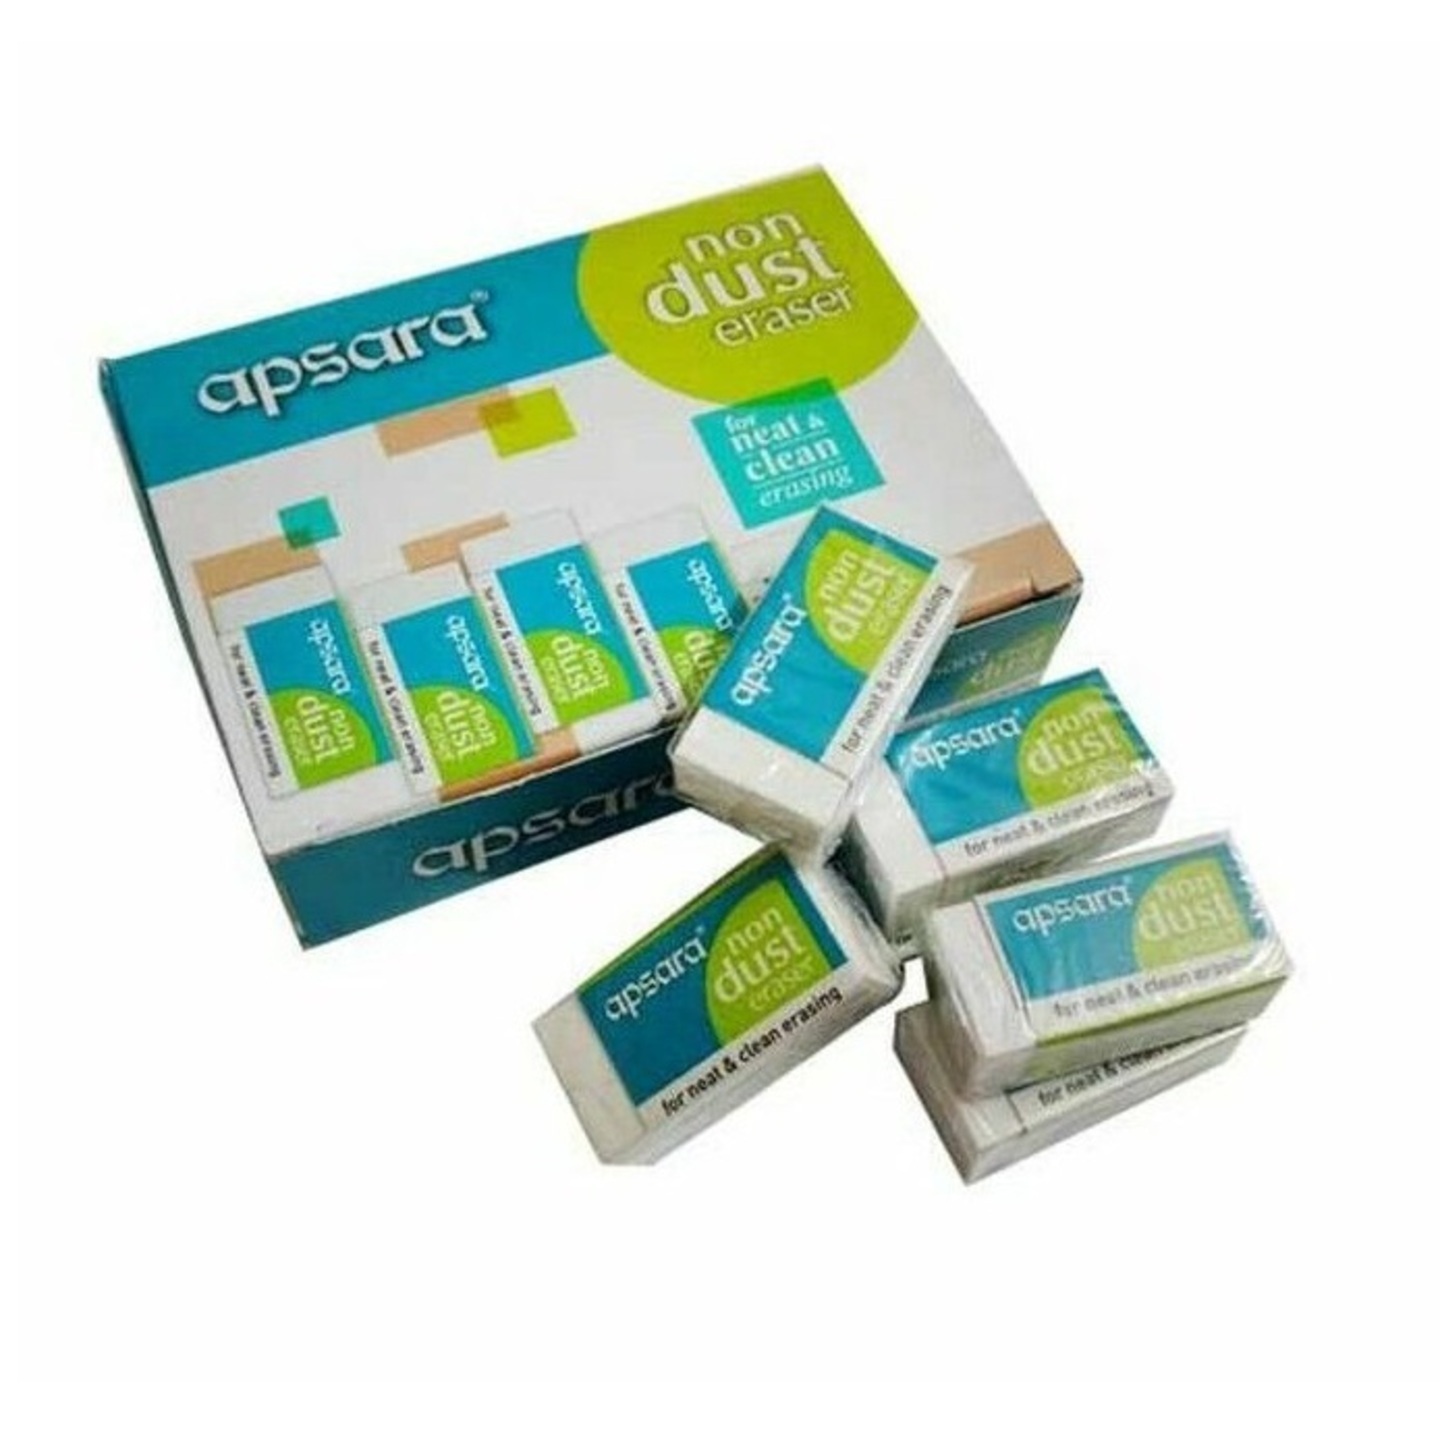 Apsara non dust erasers - Pack of 20